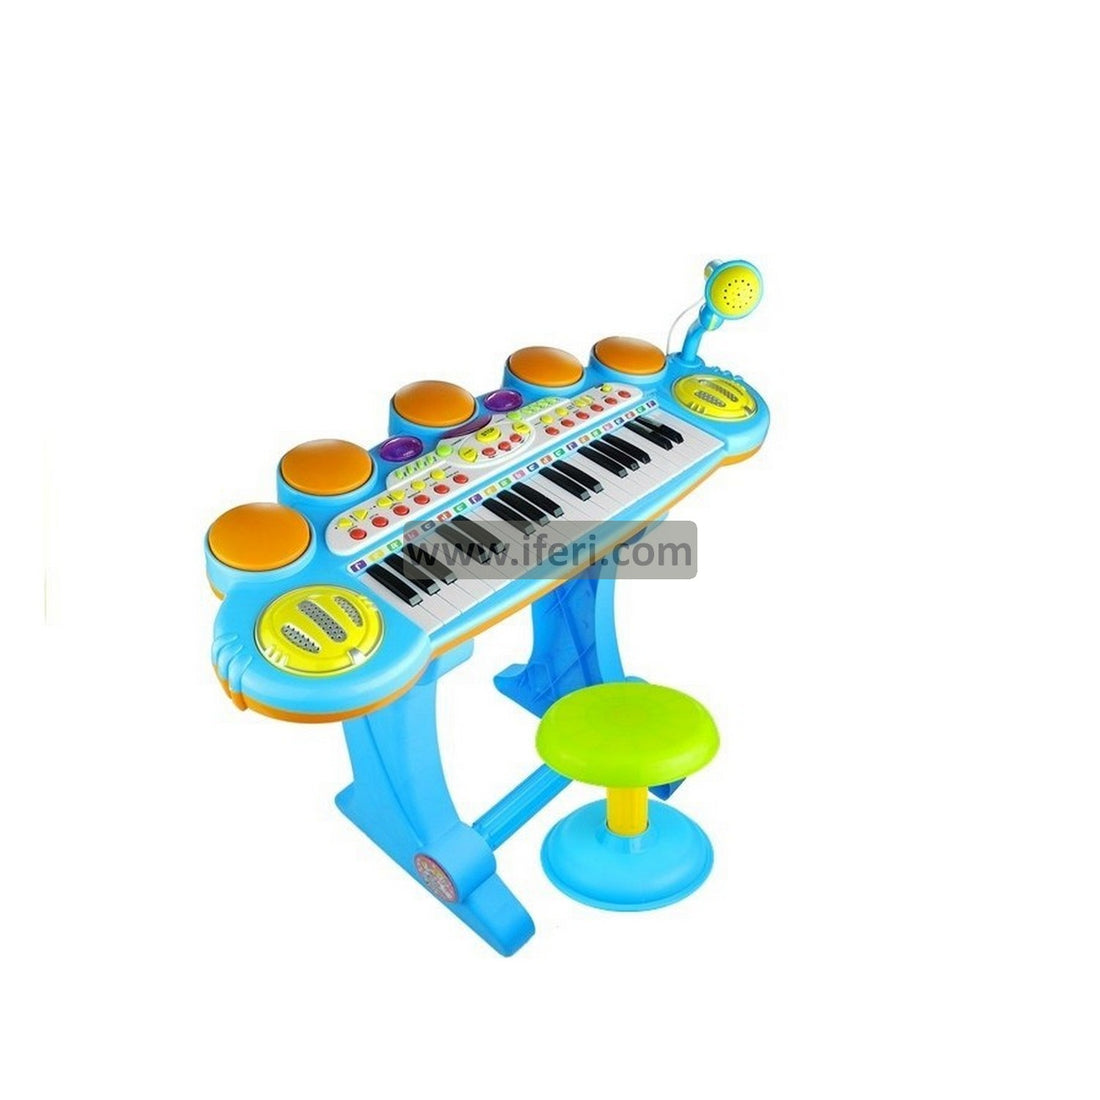 Buy Children's Keyboard with Microphone and Table from iferi.com in Bangladesh